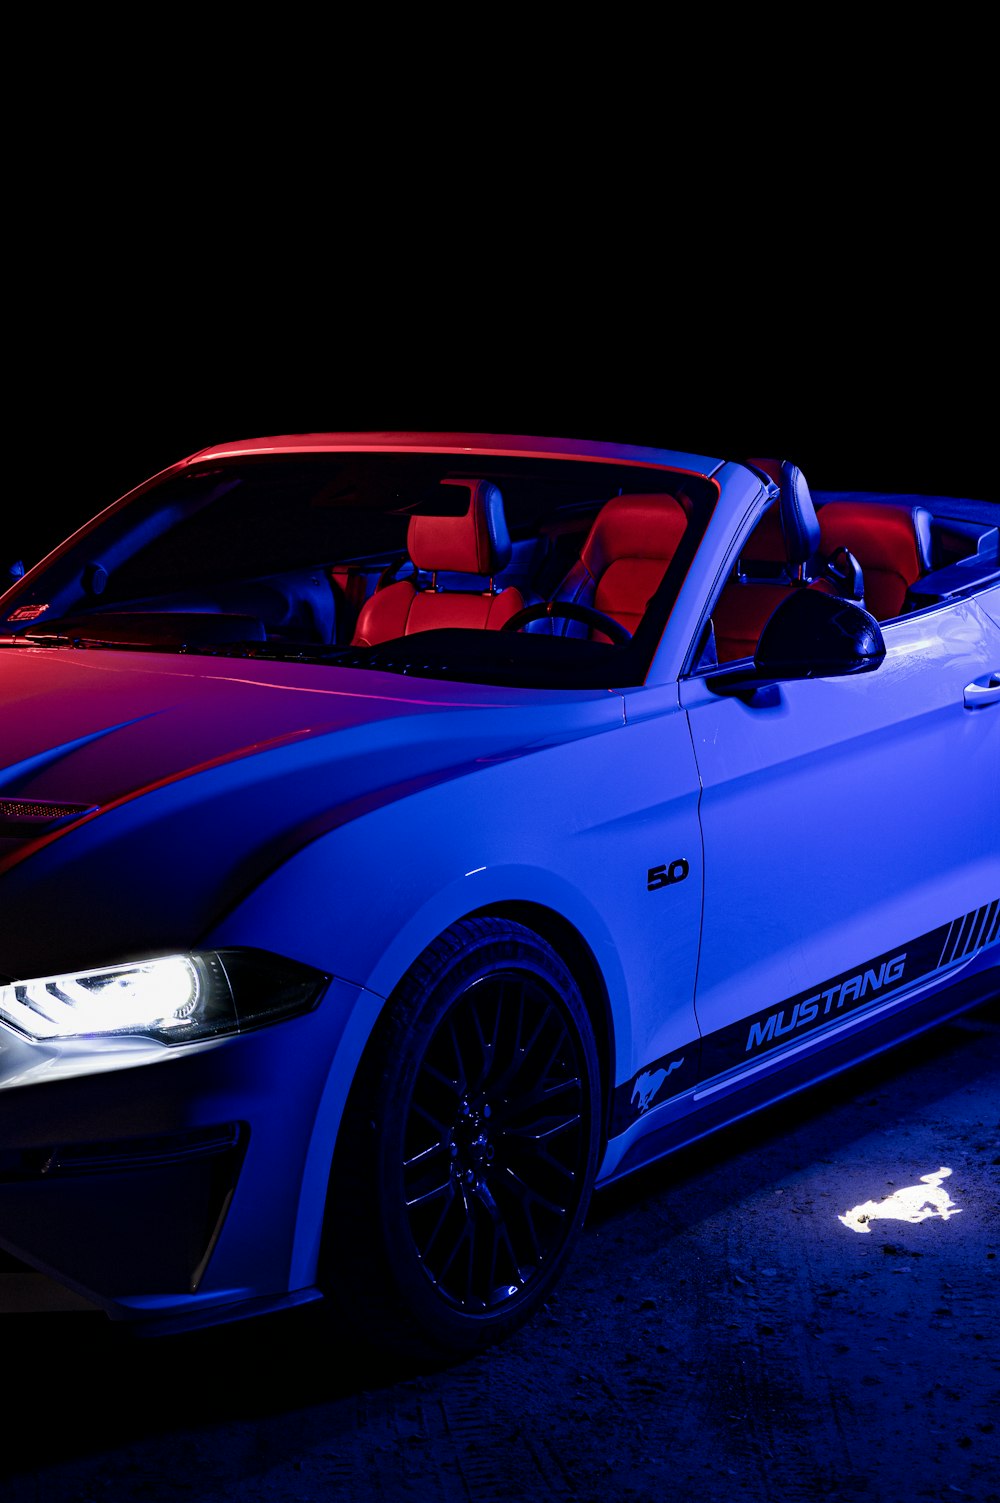 a red and blue convertible car parked in the dark